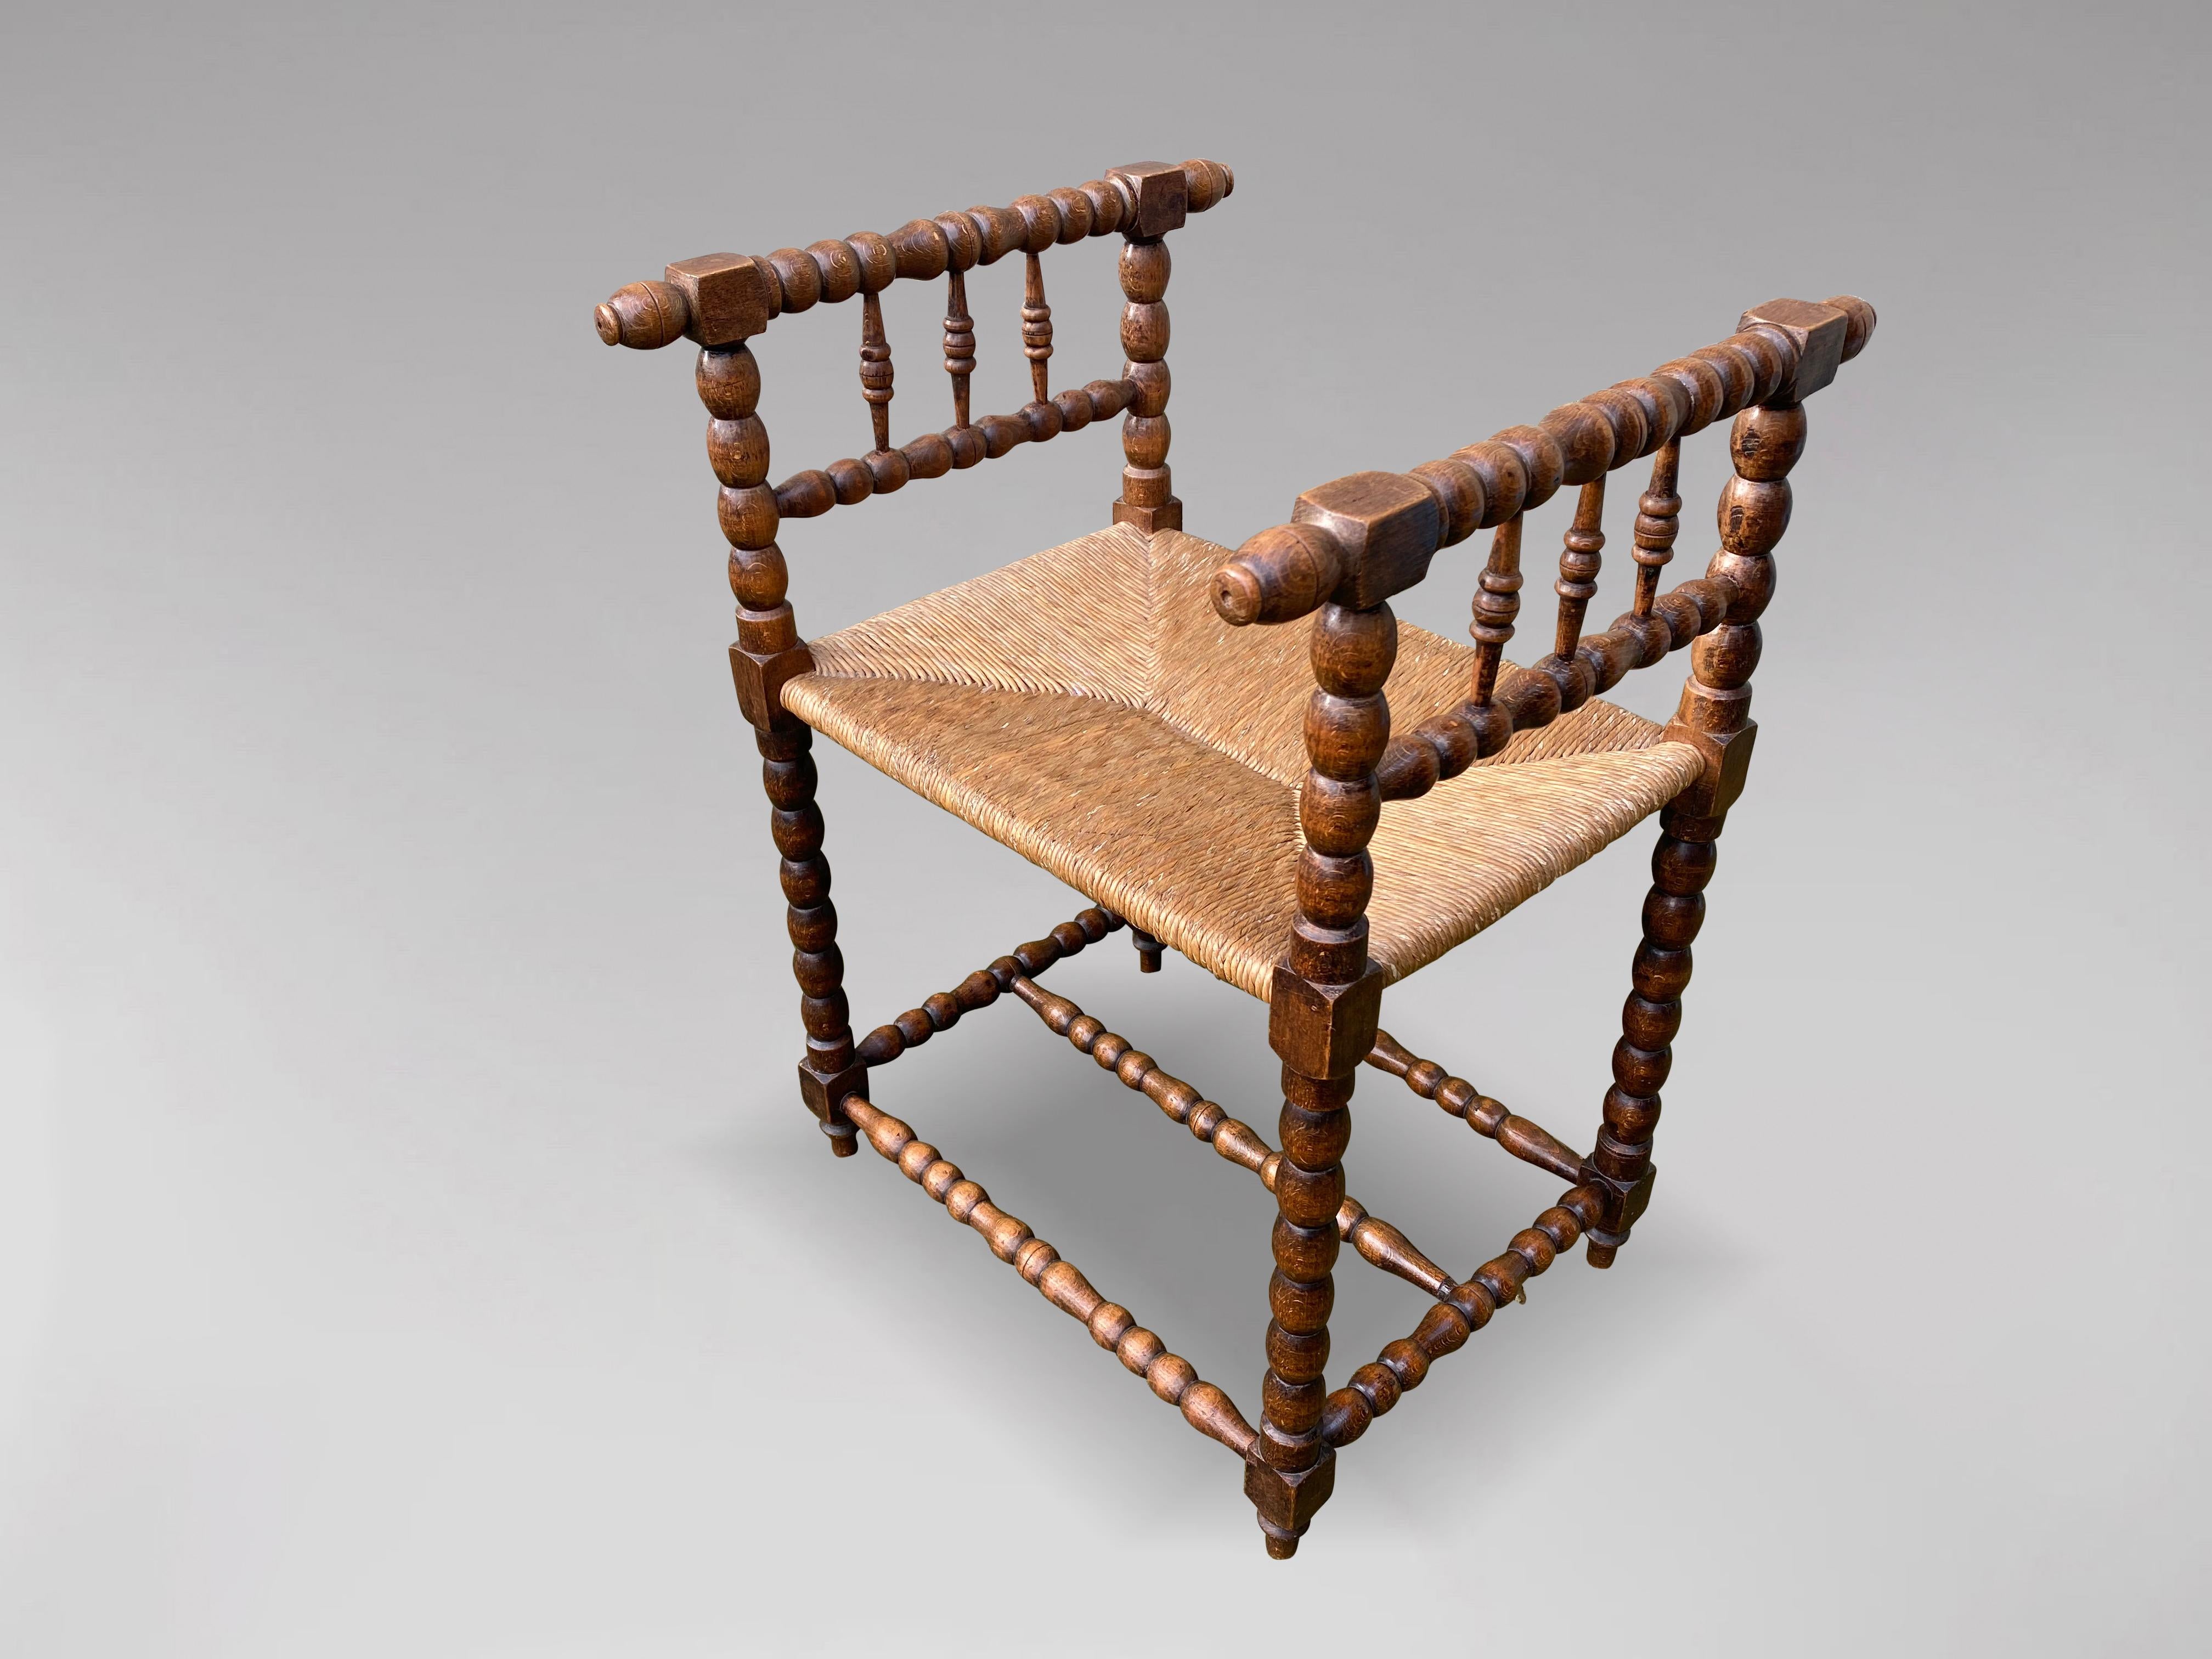 A very ornate late 19th century walnut turned bobbin and rush seat stool or armchair. Beautifully turned bobbin frame with triple stretchers.

The dimensions are:
Height: 75cm (29.5in)
Width: 55cm (21.7in)
Depth: 53cm (20.9in)

Comfortable